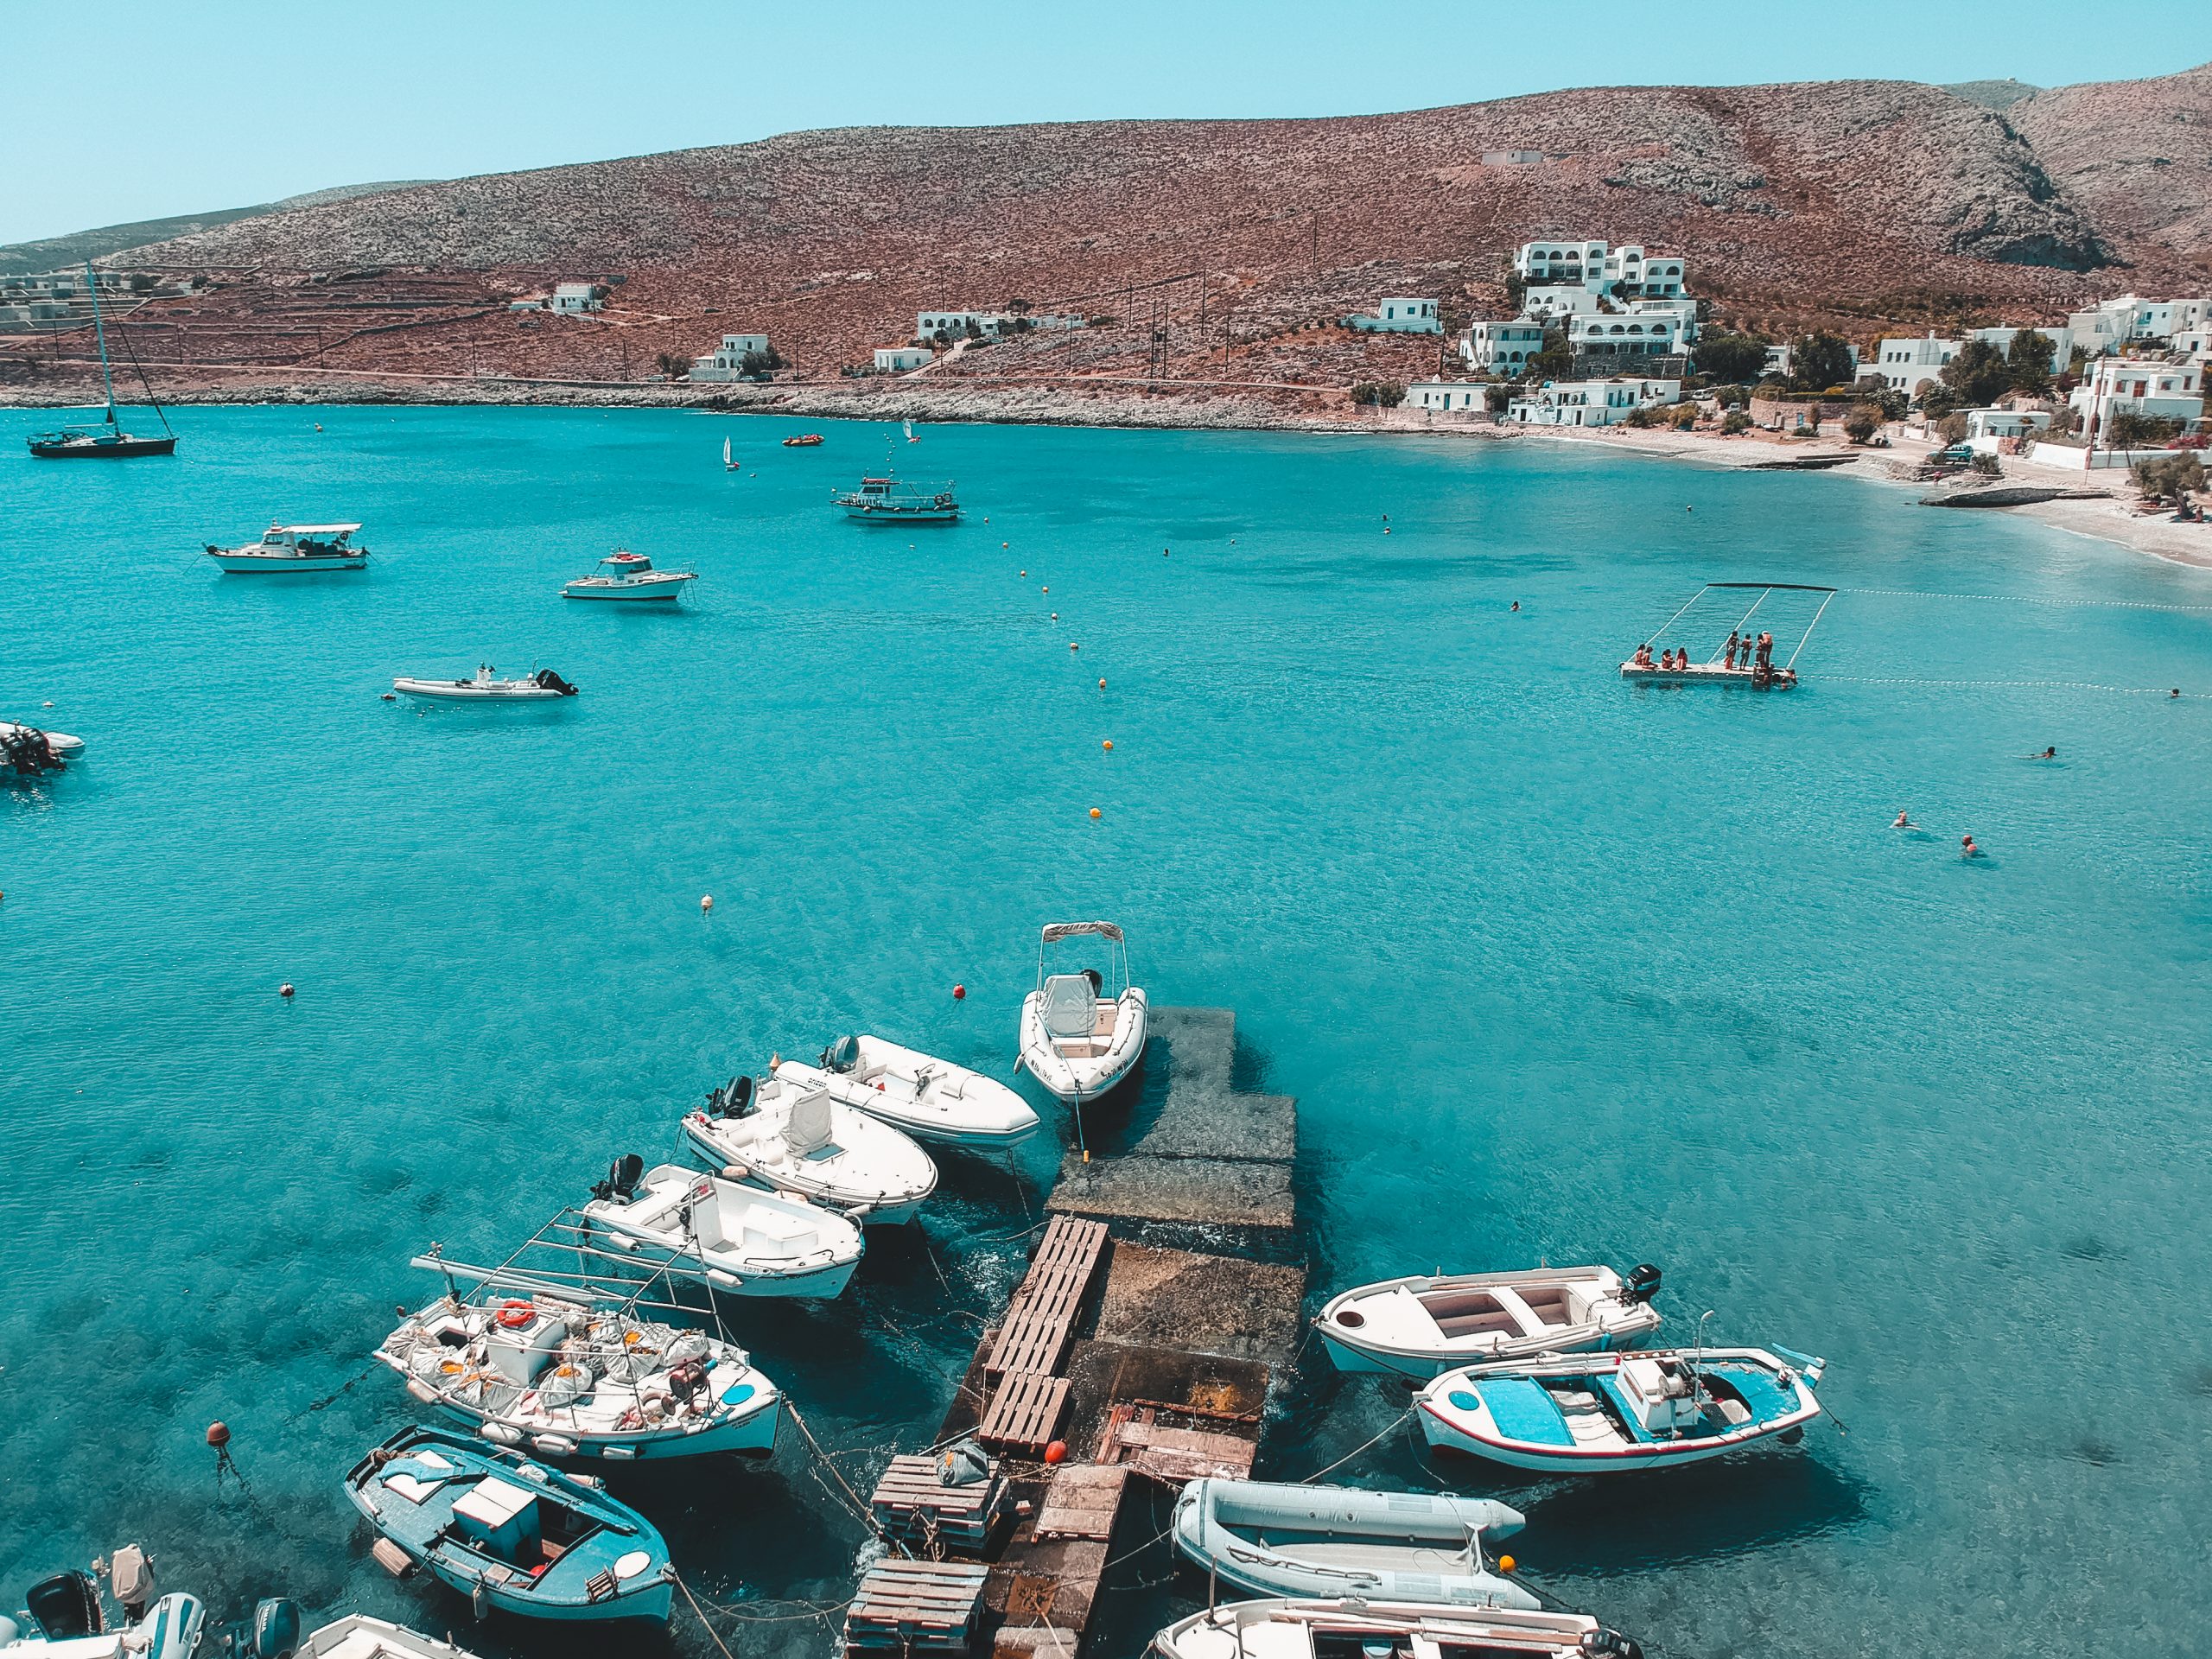 An aerial view of the boats and ocean in Folegandros